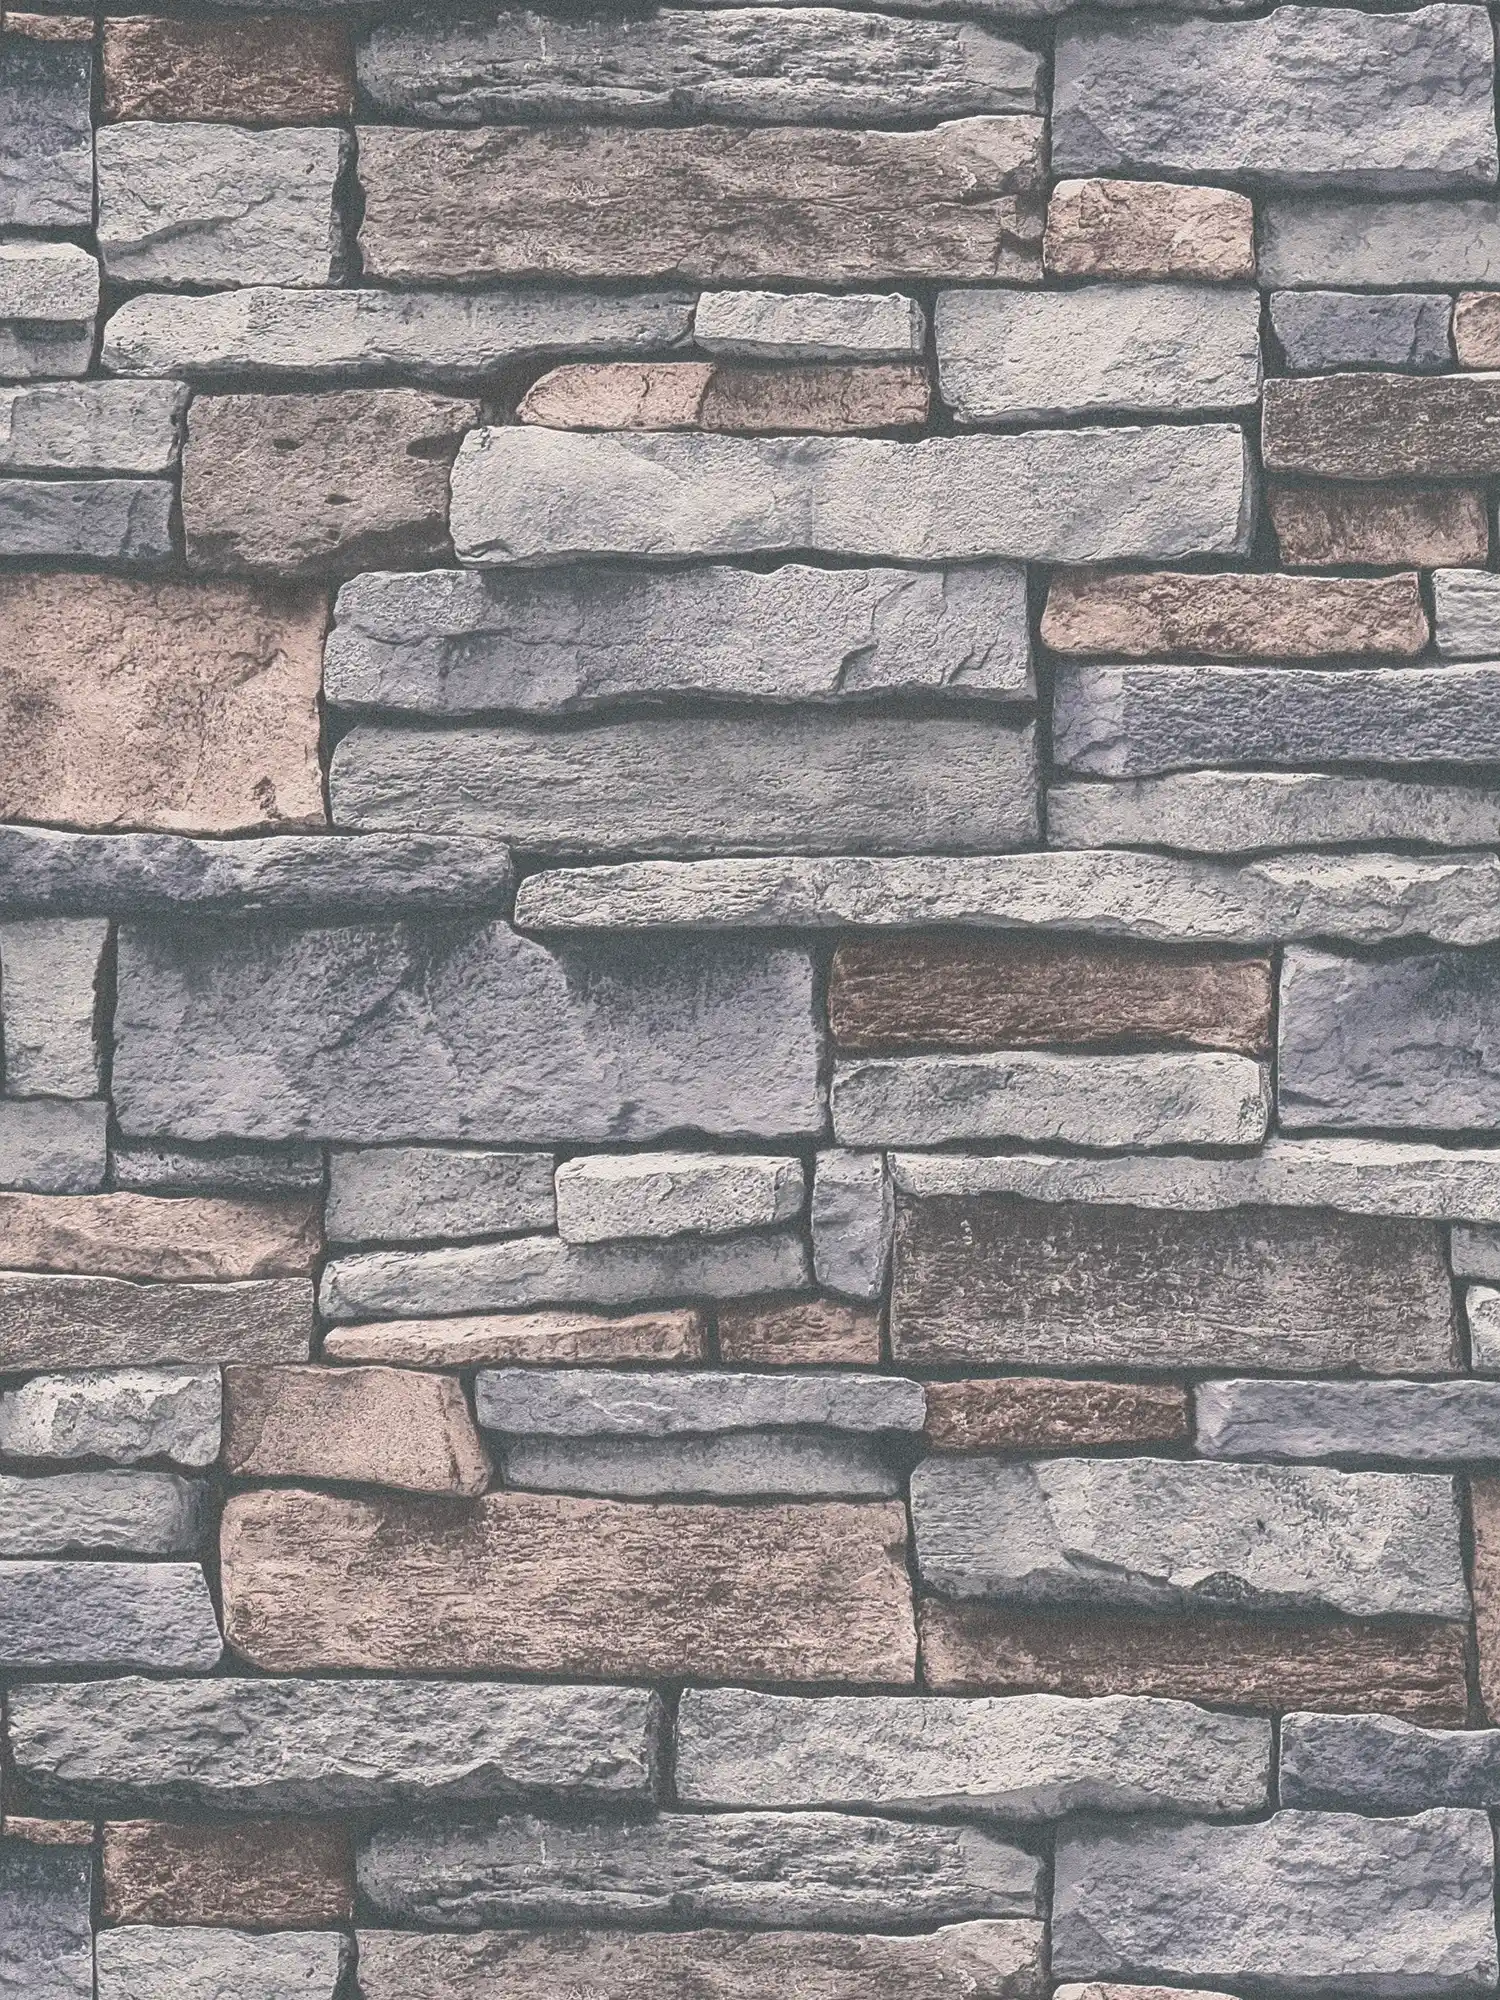         Non-woven wallpaper in stone look with natural stone wall - grey, beige, brown
    